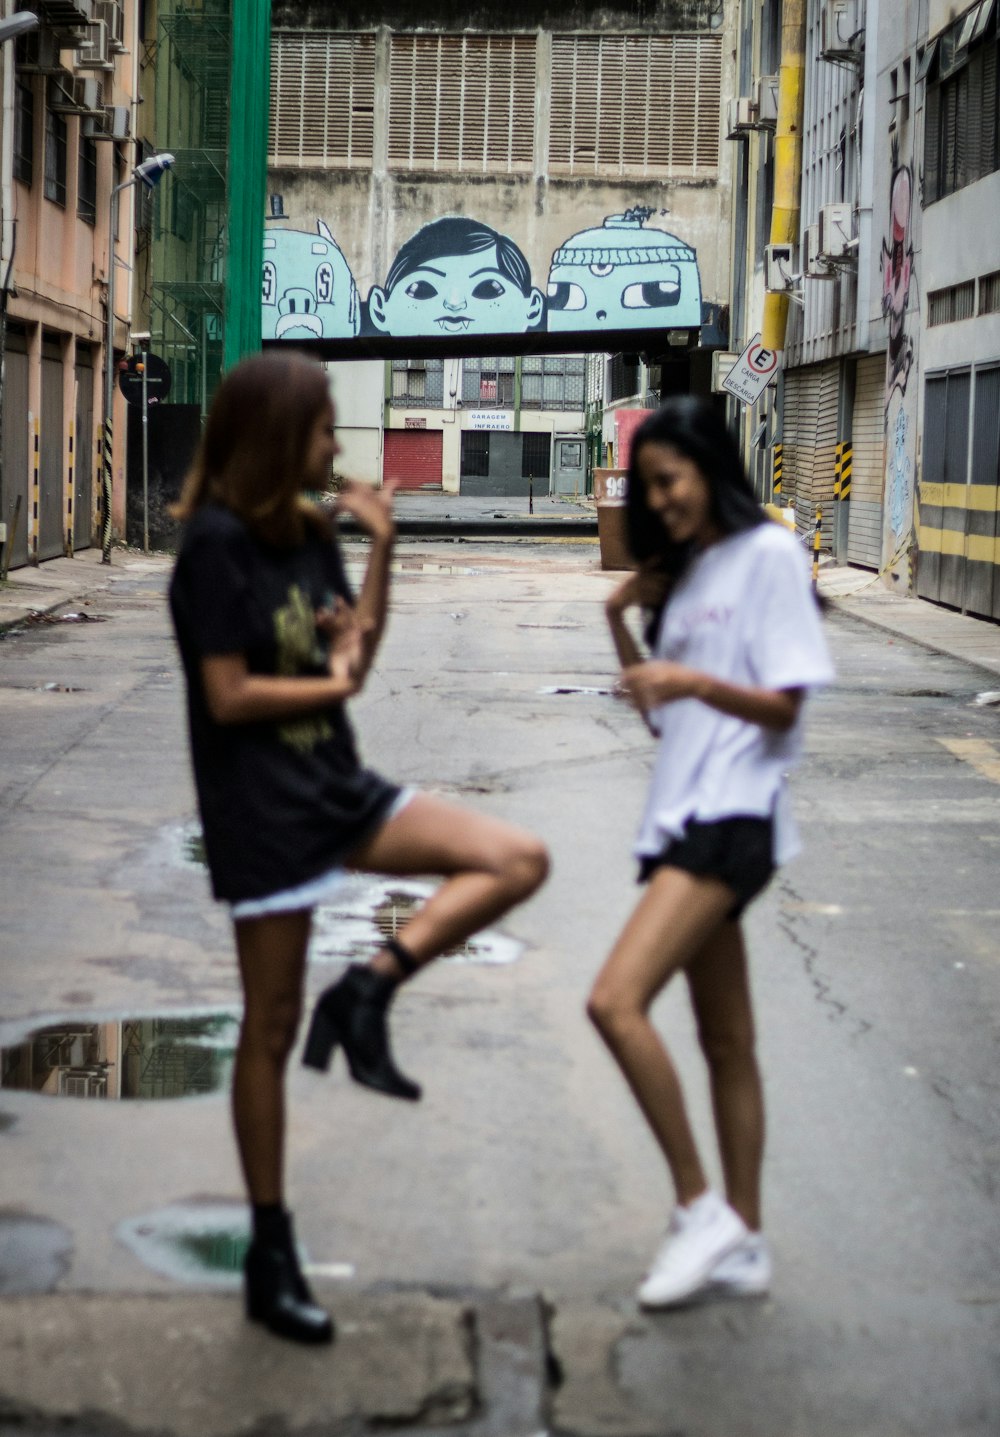 two women in the alley during daytime